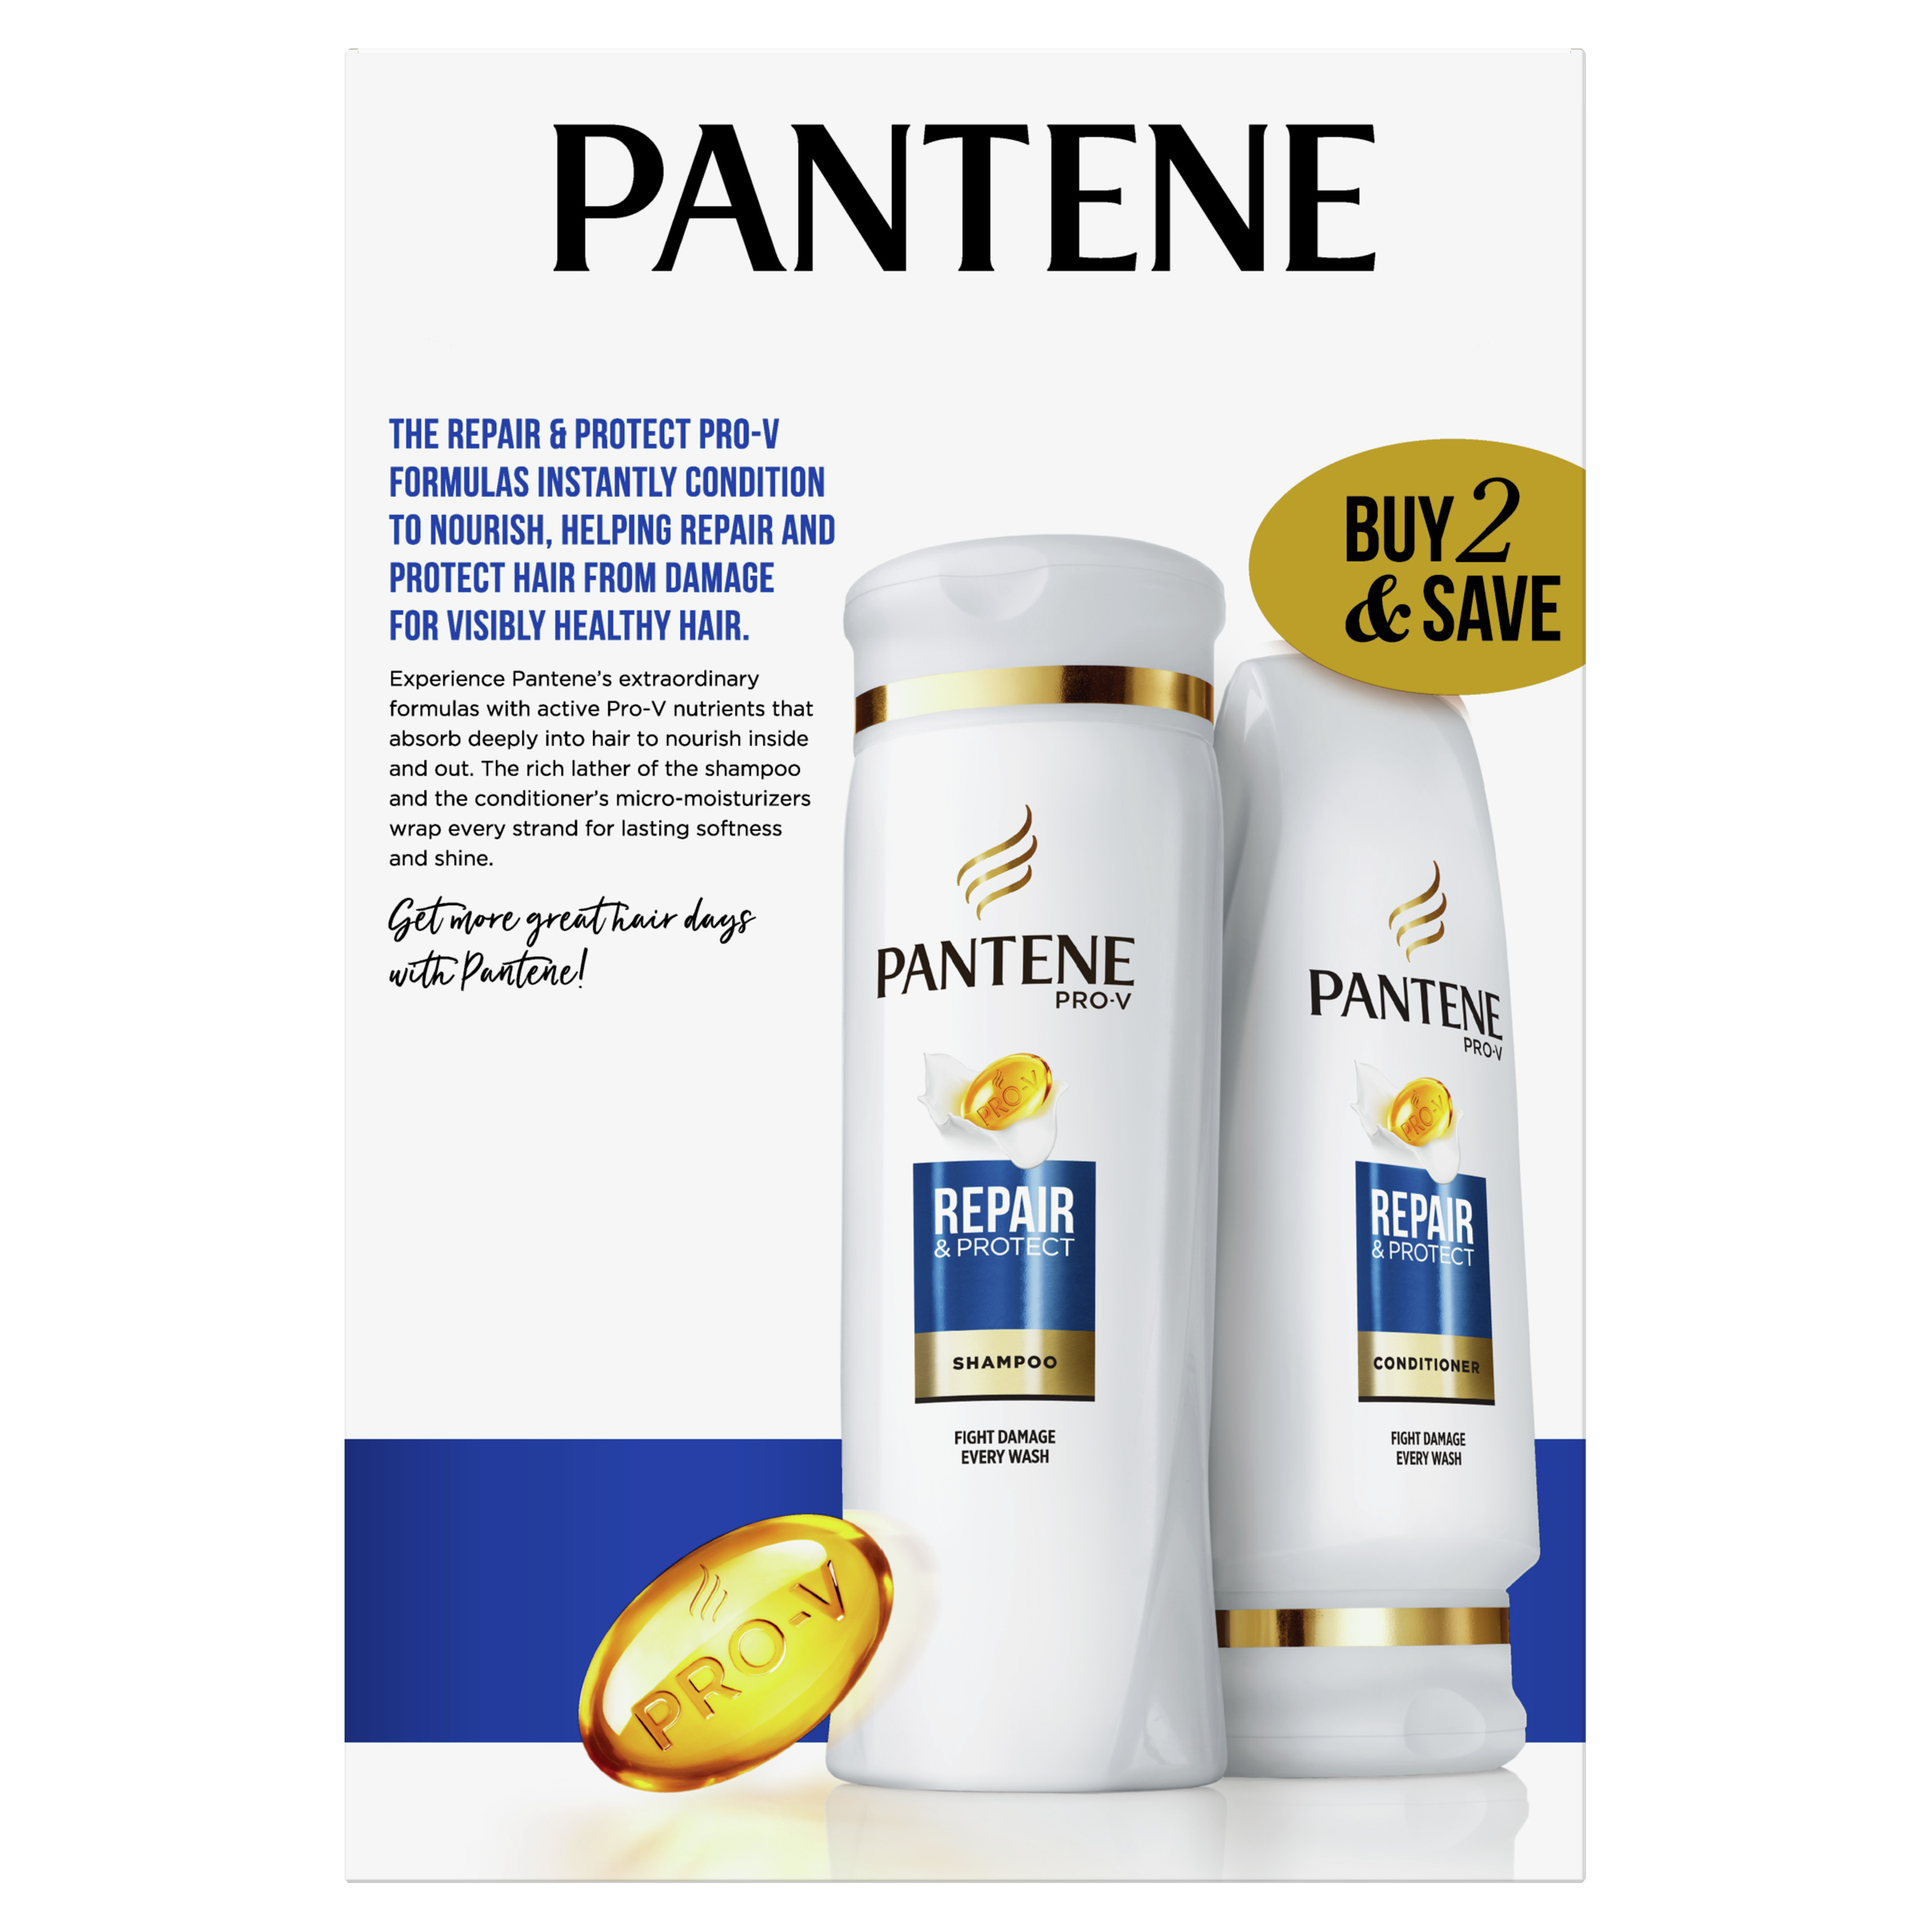 Pantene Shampoo and Conditioner Set, Repair and Protect, 12-12.6 oz - image 3 of 9